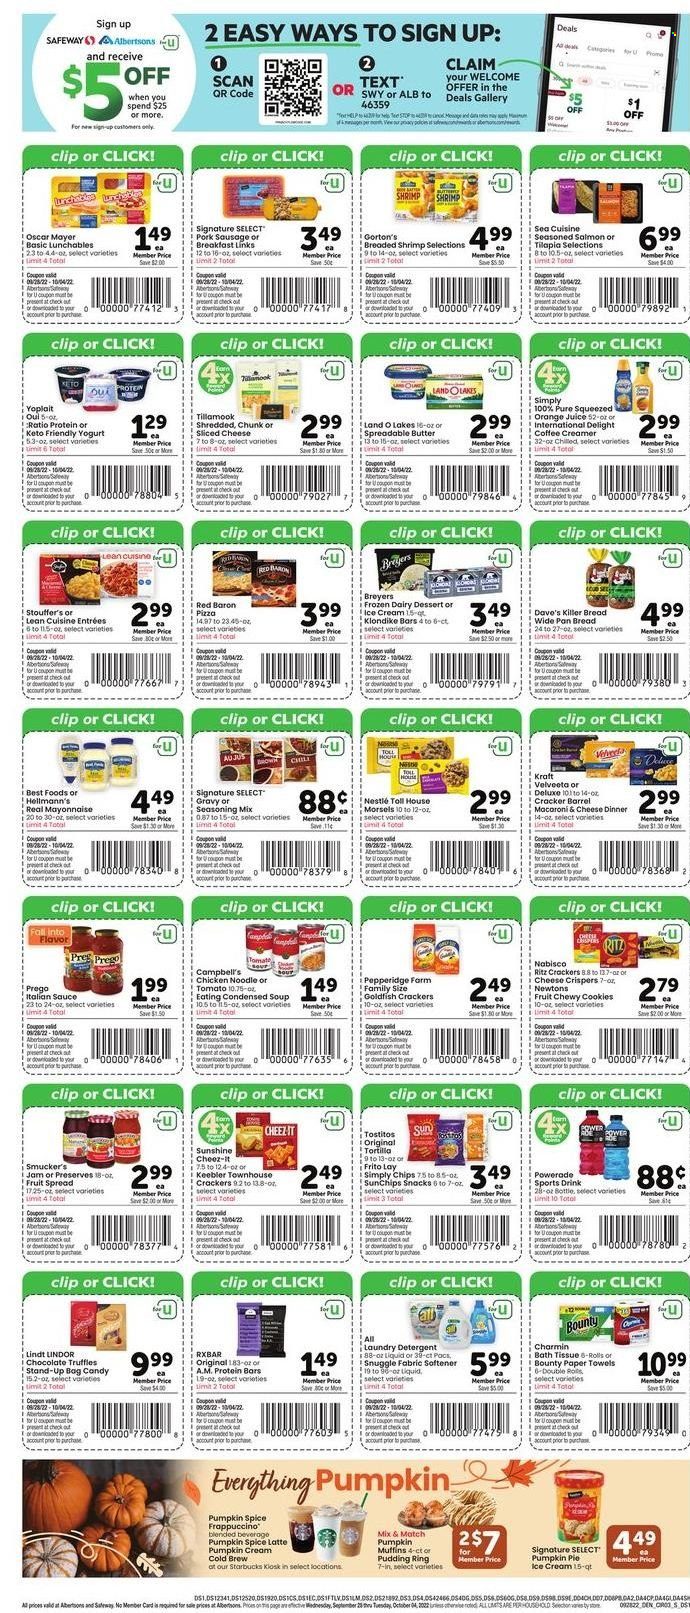 thumbnail - Safeway Flyer - 09/28/2022 - 10/04/2022 - Sales products - bread, tortillas, pie, muffin, pudding ring, salmon, tilapia, shrimps, Campbell's, macaroni & cheese, pizza, condensed soup, soup, sauce, noodles, instant soup, Lean Cuisine, Lunchables, Kraft®, Oscar Mayer, sausage, pork sausage, sliced cheese, yoghurt, Yoplait, butter, Sunshine, spreadable butter, creamer, mayonnaise, Hellmann’s, ice cream, Stouffer's, Red Baron, cookies, Nestlé, snack, Lindt, Lindor, Bounty, truffles, crackers, Keebler, RITZ, Goldfish, Cheez-It, Tostitos, protein bar, spice, fruit jam, Powerade, orange juice, juice, Starbucks, frappuccino, bath tissue, kitchen towels, paper towels, Charmin, detergent, Snuggle, fabric softener, laundry detergent, comb, pan. Page 3.